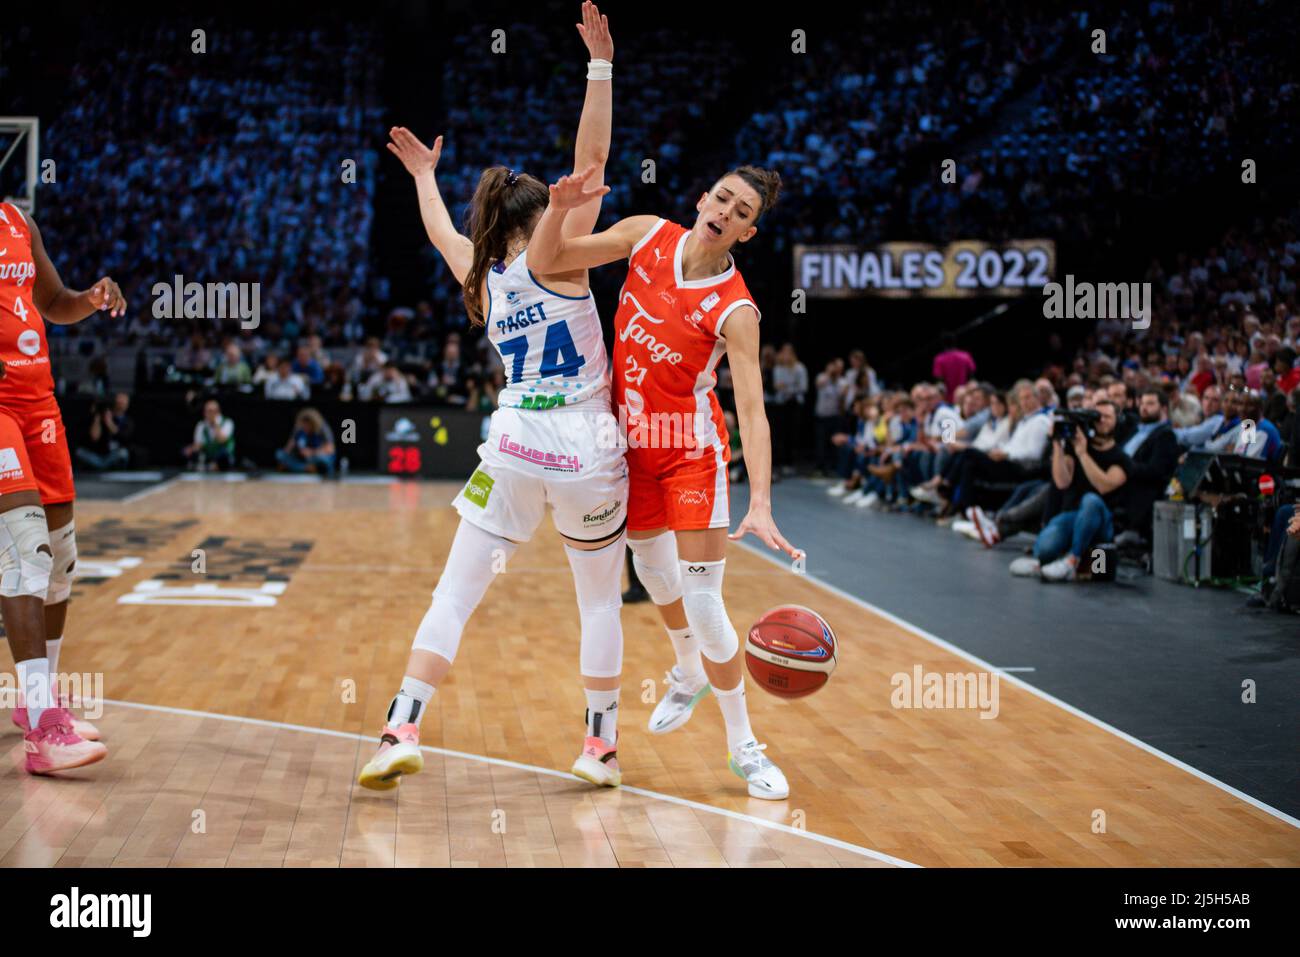 Marie Eve Paget of Basket Landes and Laetitia Guapo of Tango Bourges Basket  fight for the ball during the Women's French Cup, Final basketball match  between Basket Landes and Bourges Basket on